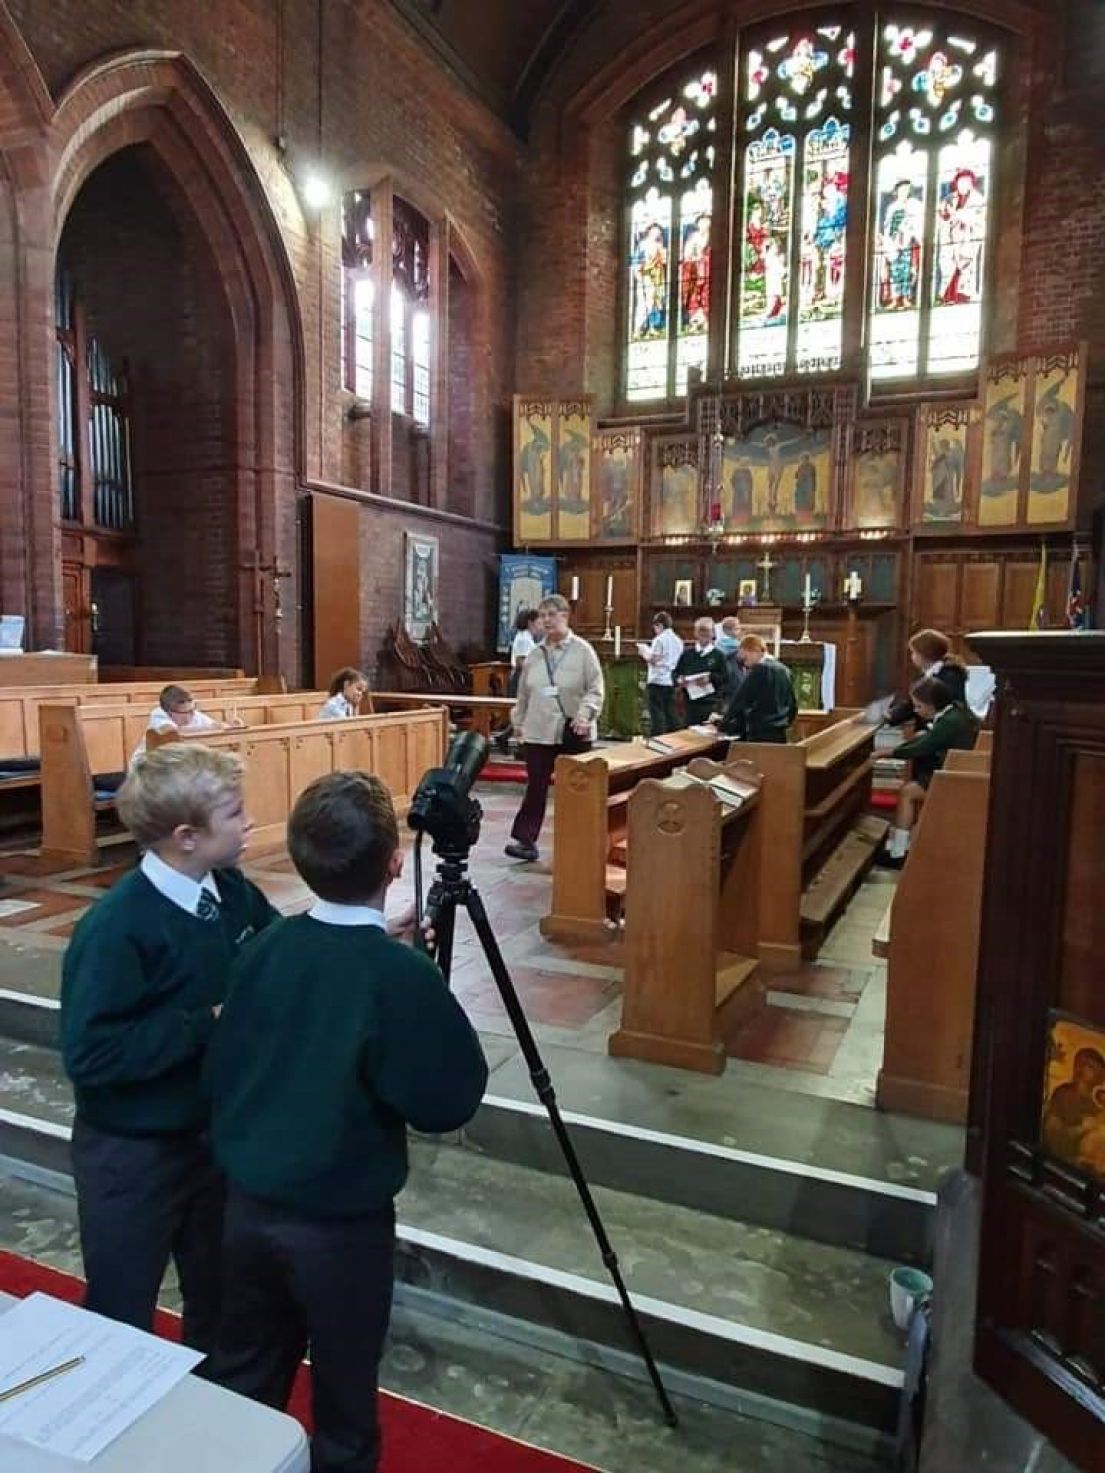 Primary school children using telescopes to look closer at the stained glass window showing the dragon in the chalice. Other children are exploring.